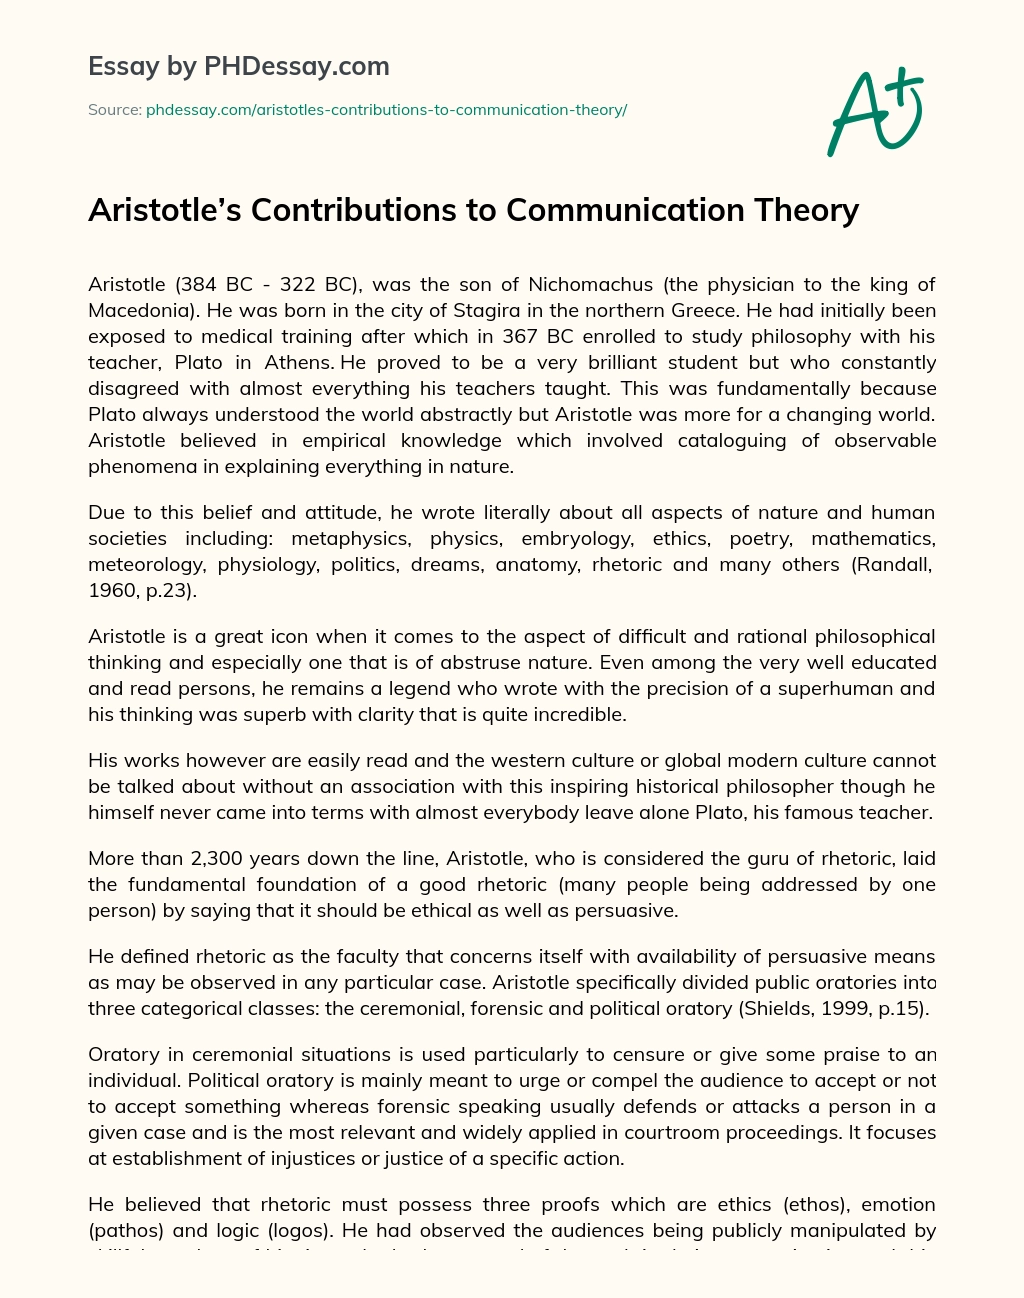 Aristotle’s Contributions to Communication Theory essay